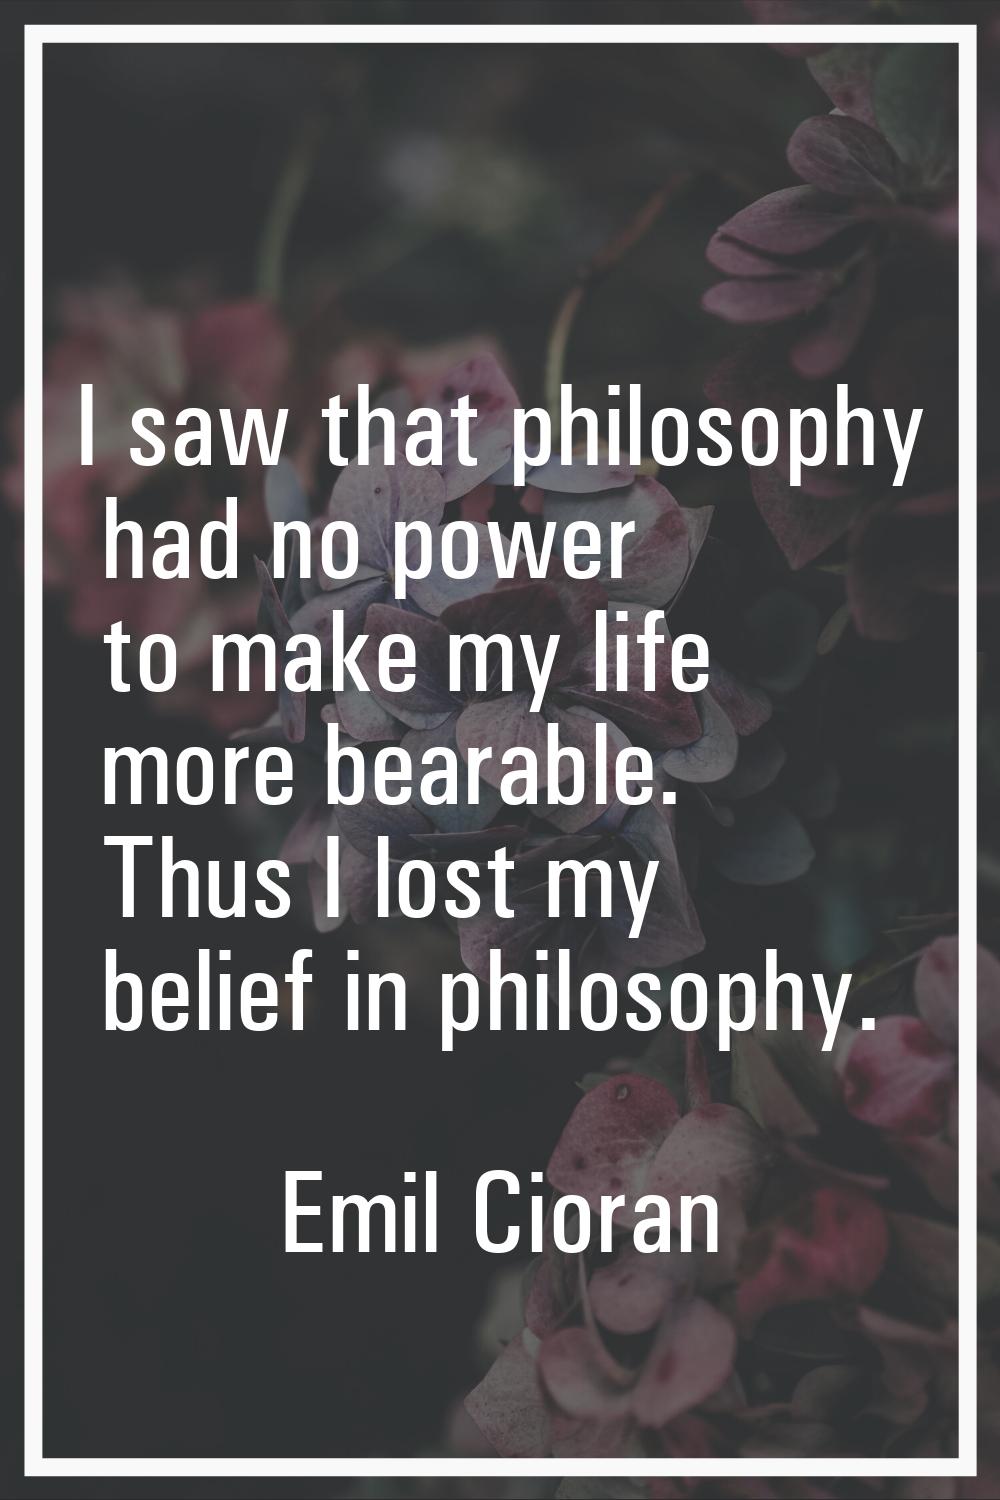 I saw that philosophy had no power to make my life more bearable. Thus I lost my belief in philosop